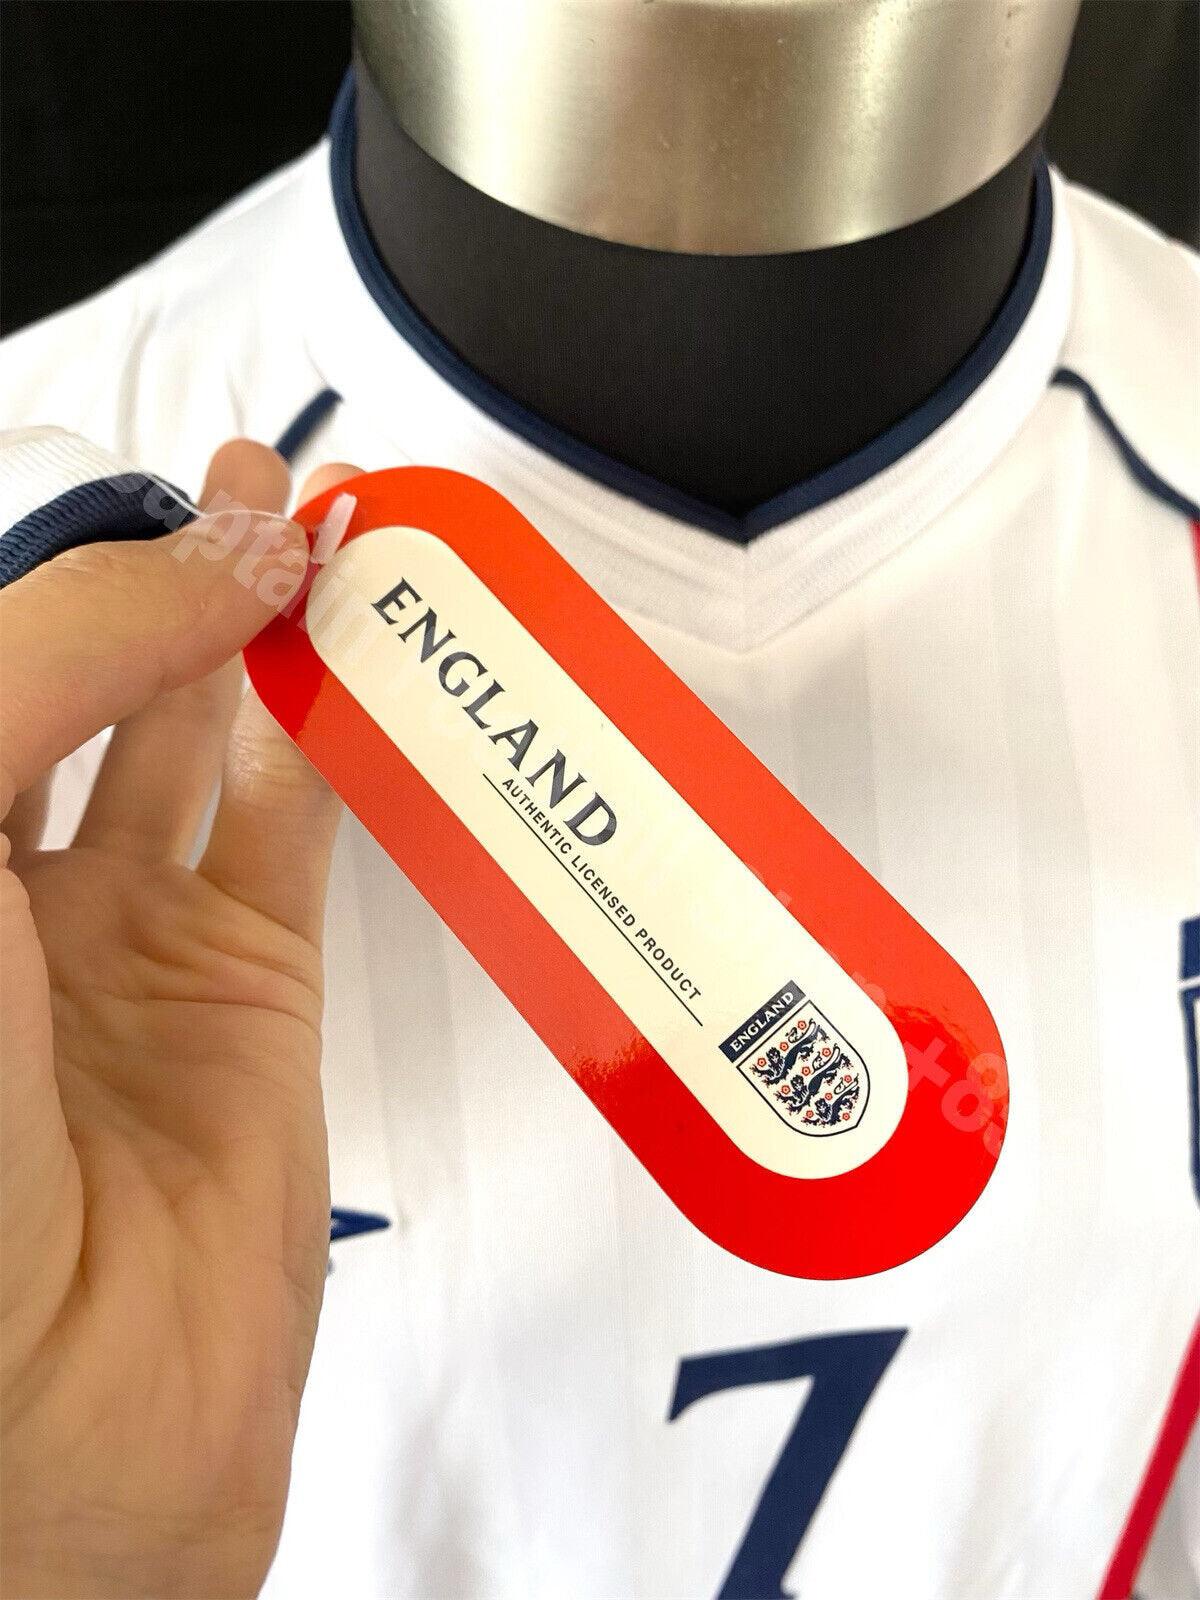 England V Greece famous world cup home jersey - Long sleeve